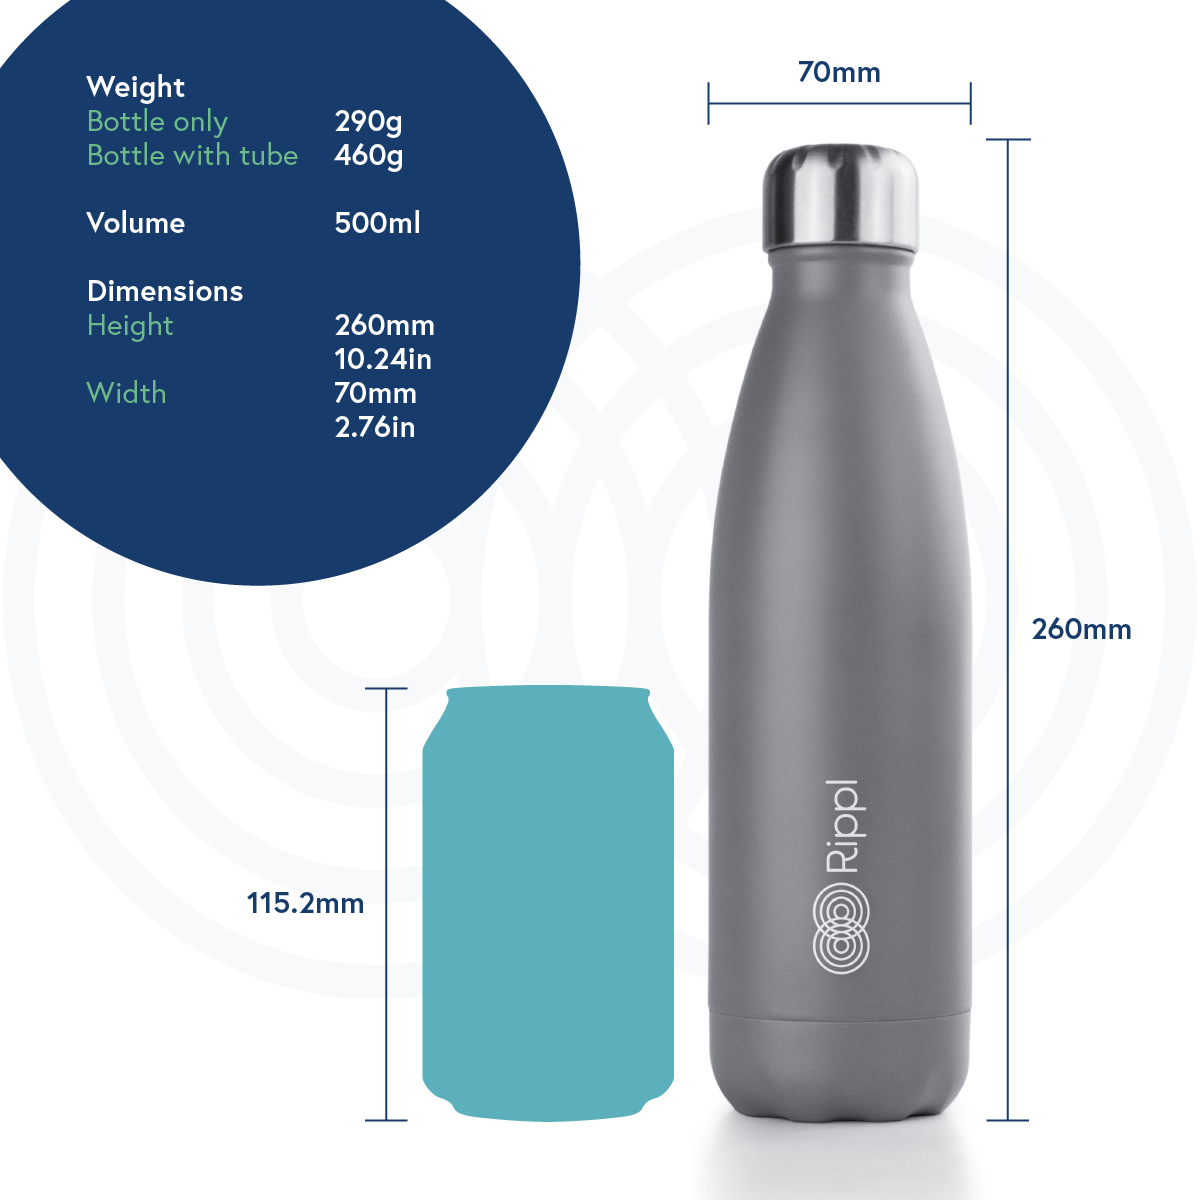 Dimensions of Rippl water bottle